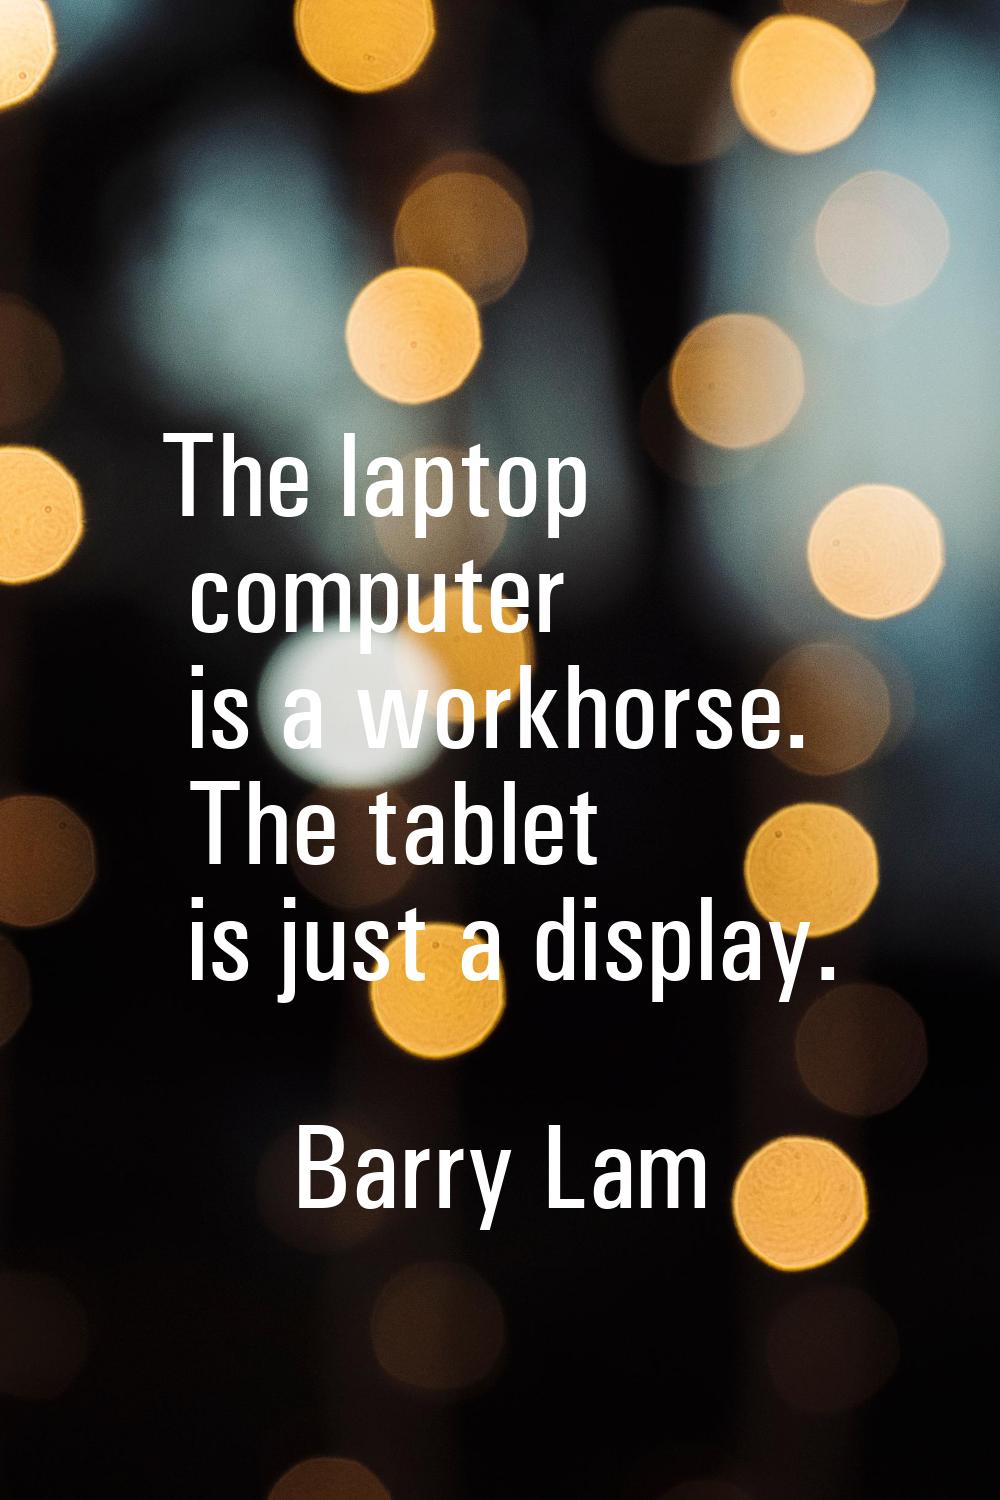 The laptop computer is a workhorse. The tablet is just a display.